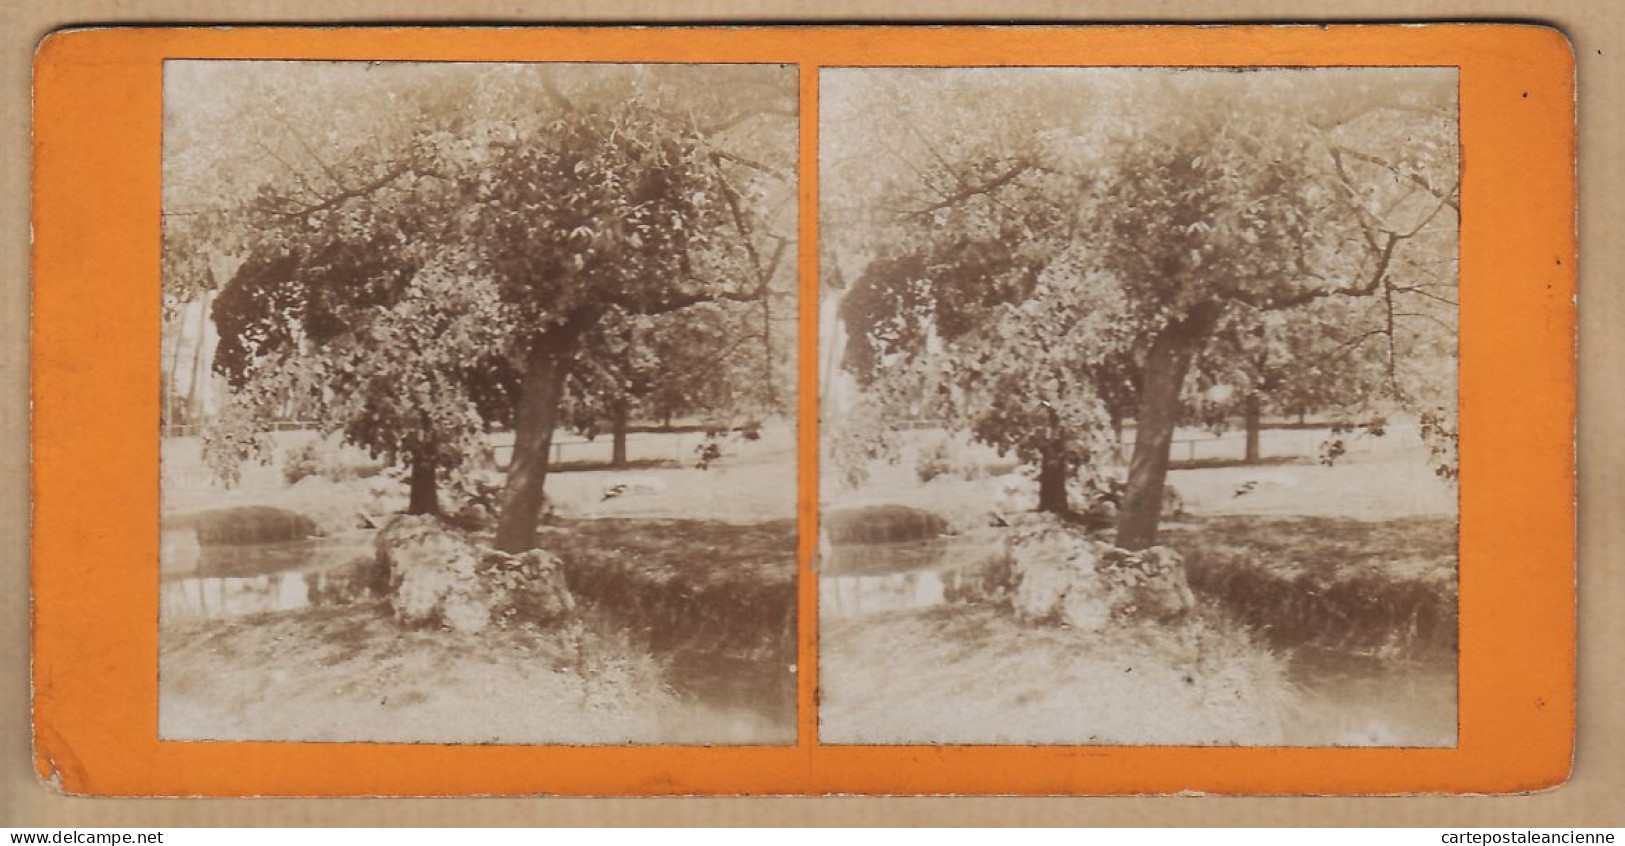 04568 / Stereo View 1890s Arbre OLIVIERS Olivier Olive Tree Photographie Botanique Flore  - Stereoscoop